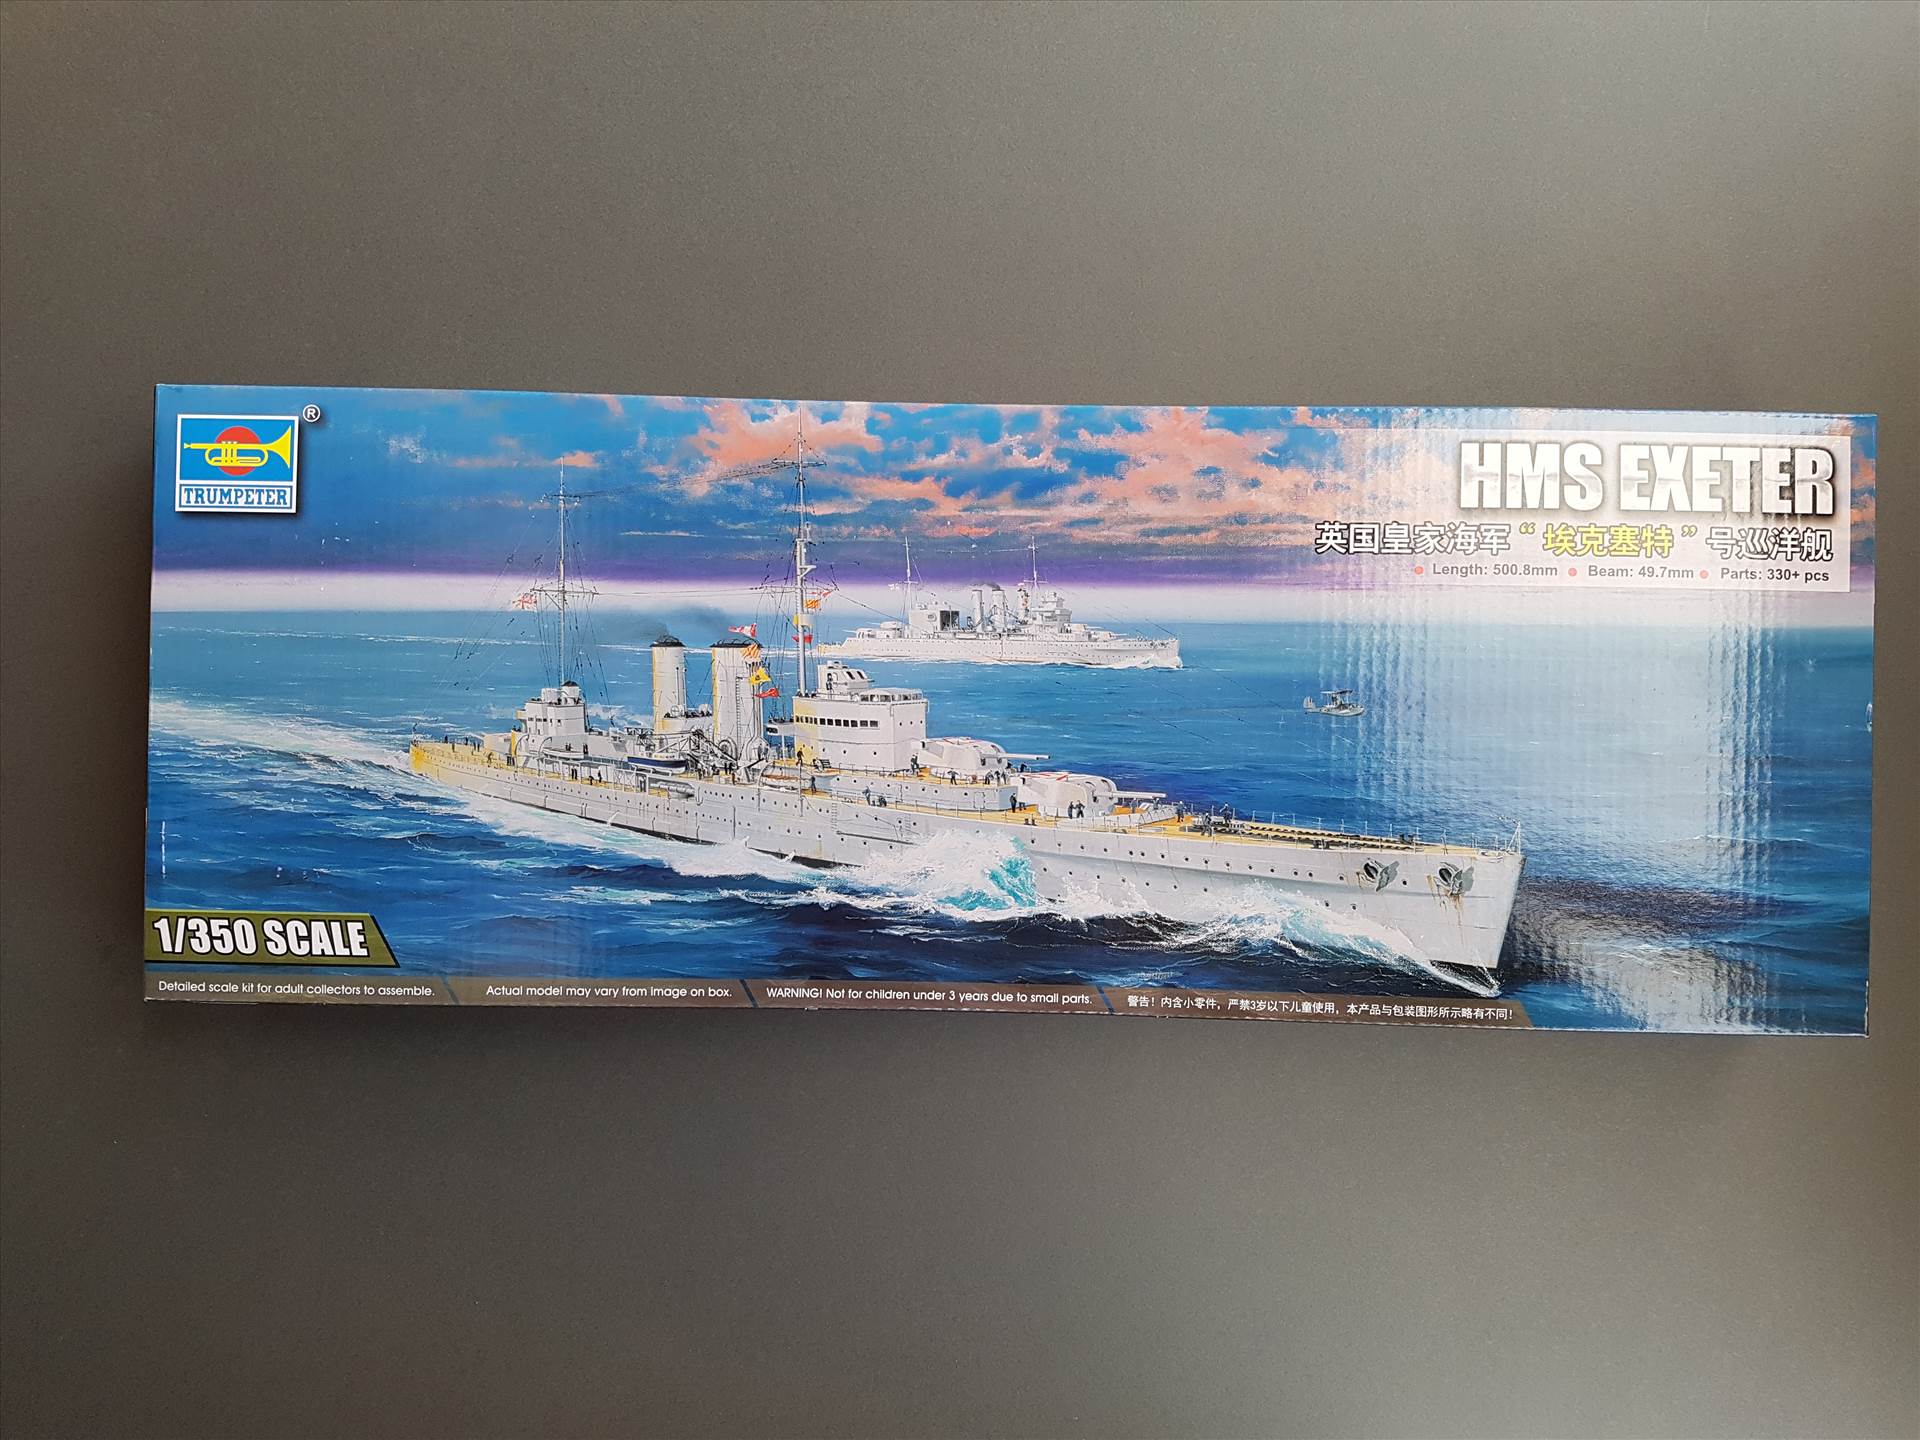 Trumpeter 05350 1/350 HMS Exeter Heavy Cruiser for sale online